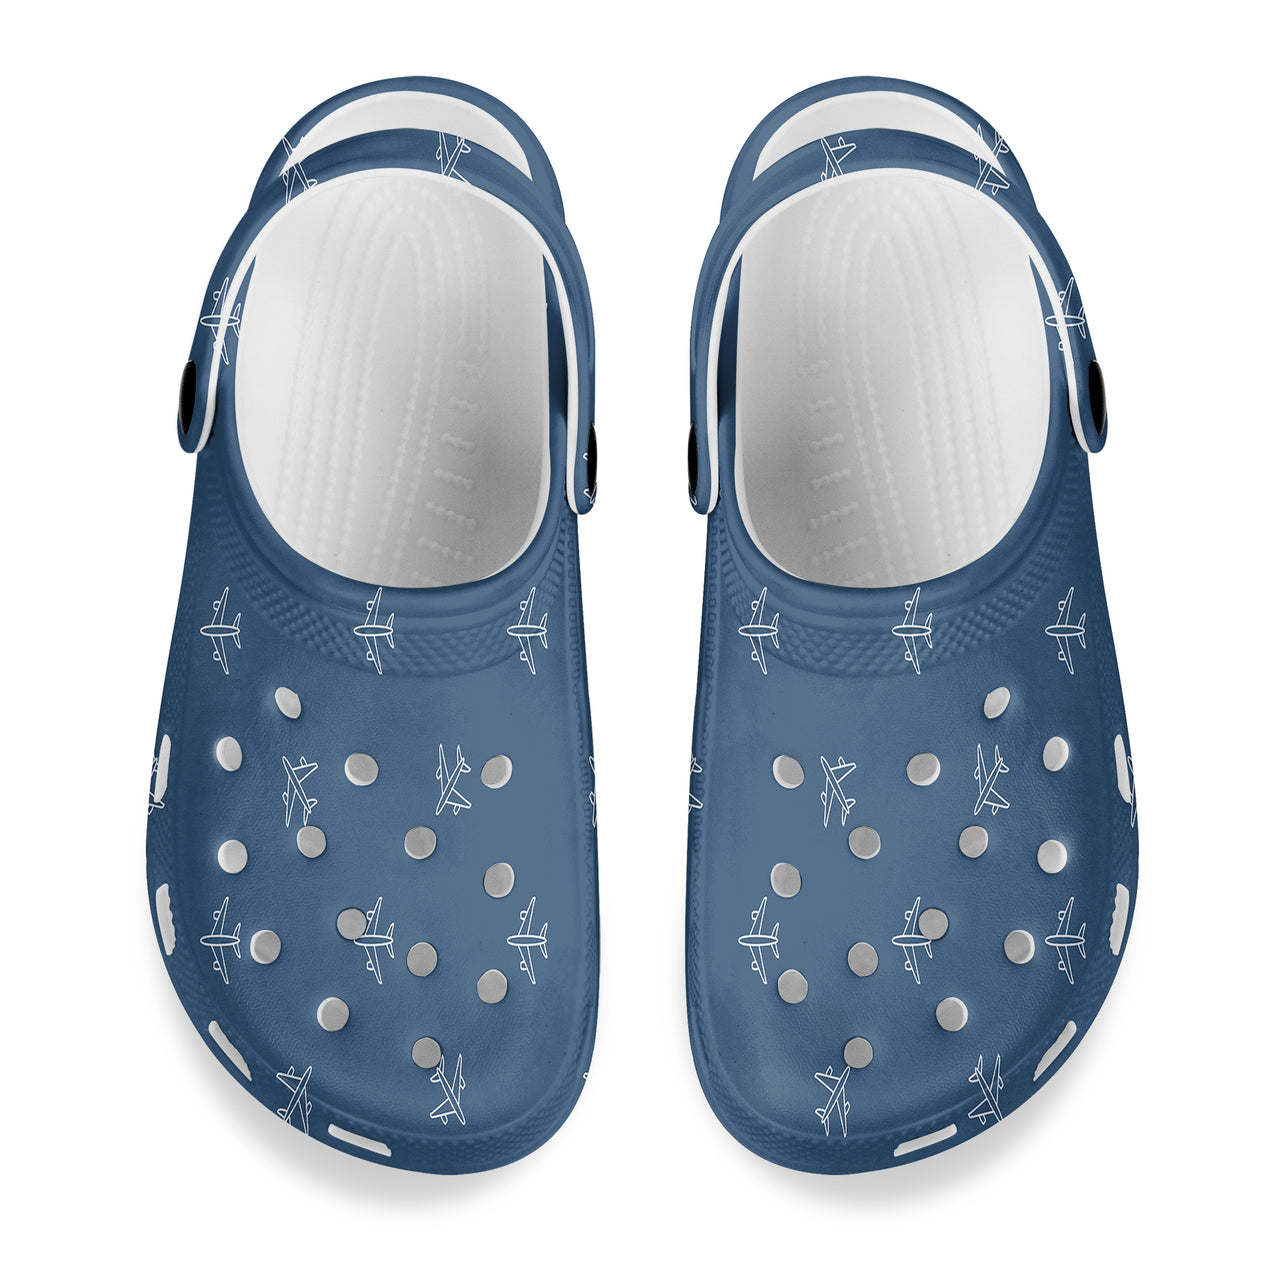 Nice Airplanes (Blue) Designed Hole Shoes & Slippers (WOMEN)